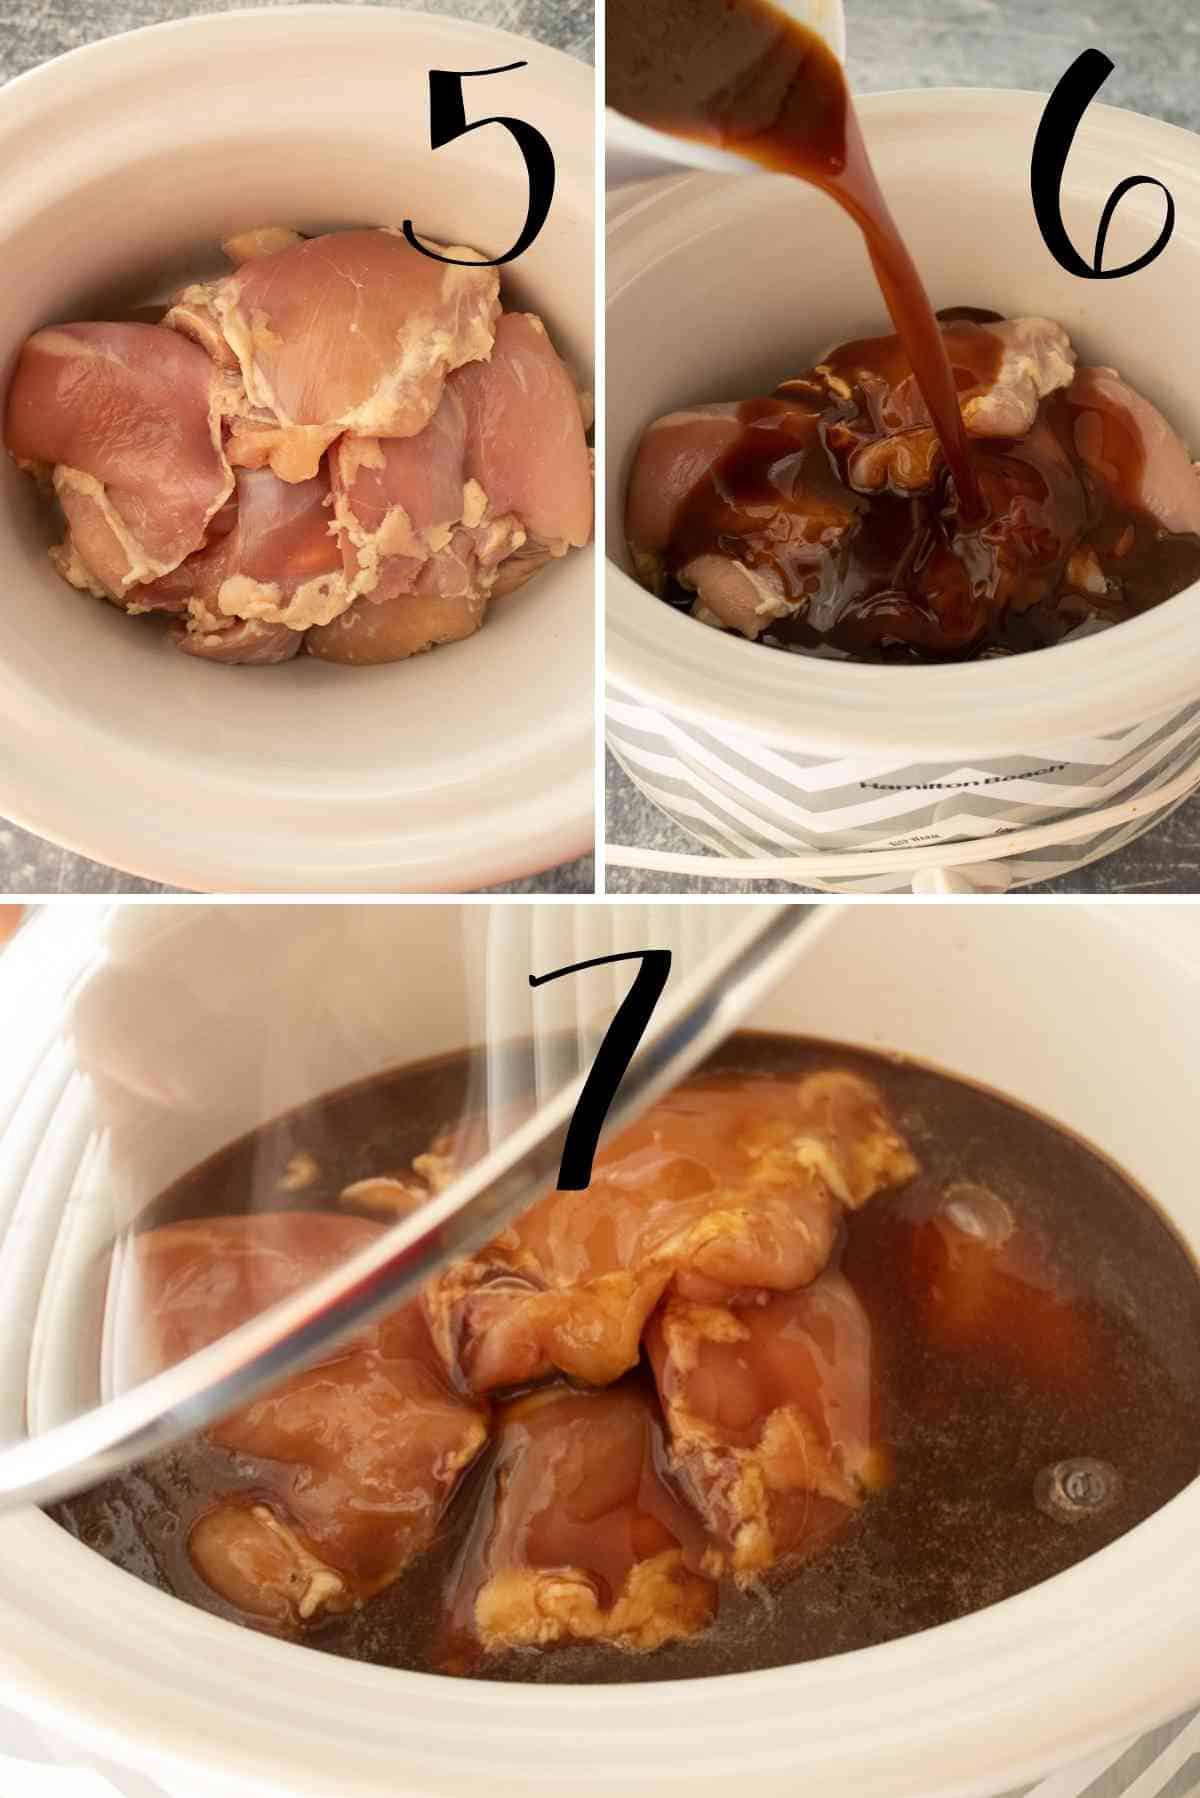 Pour honey barbecue sauce over chicken in the crockpot and cook for 5 hours.